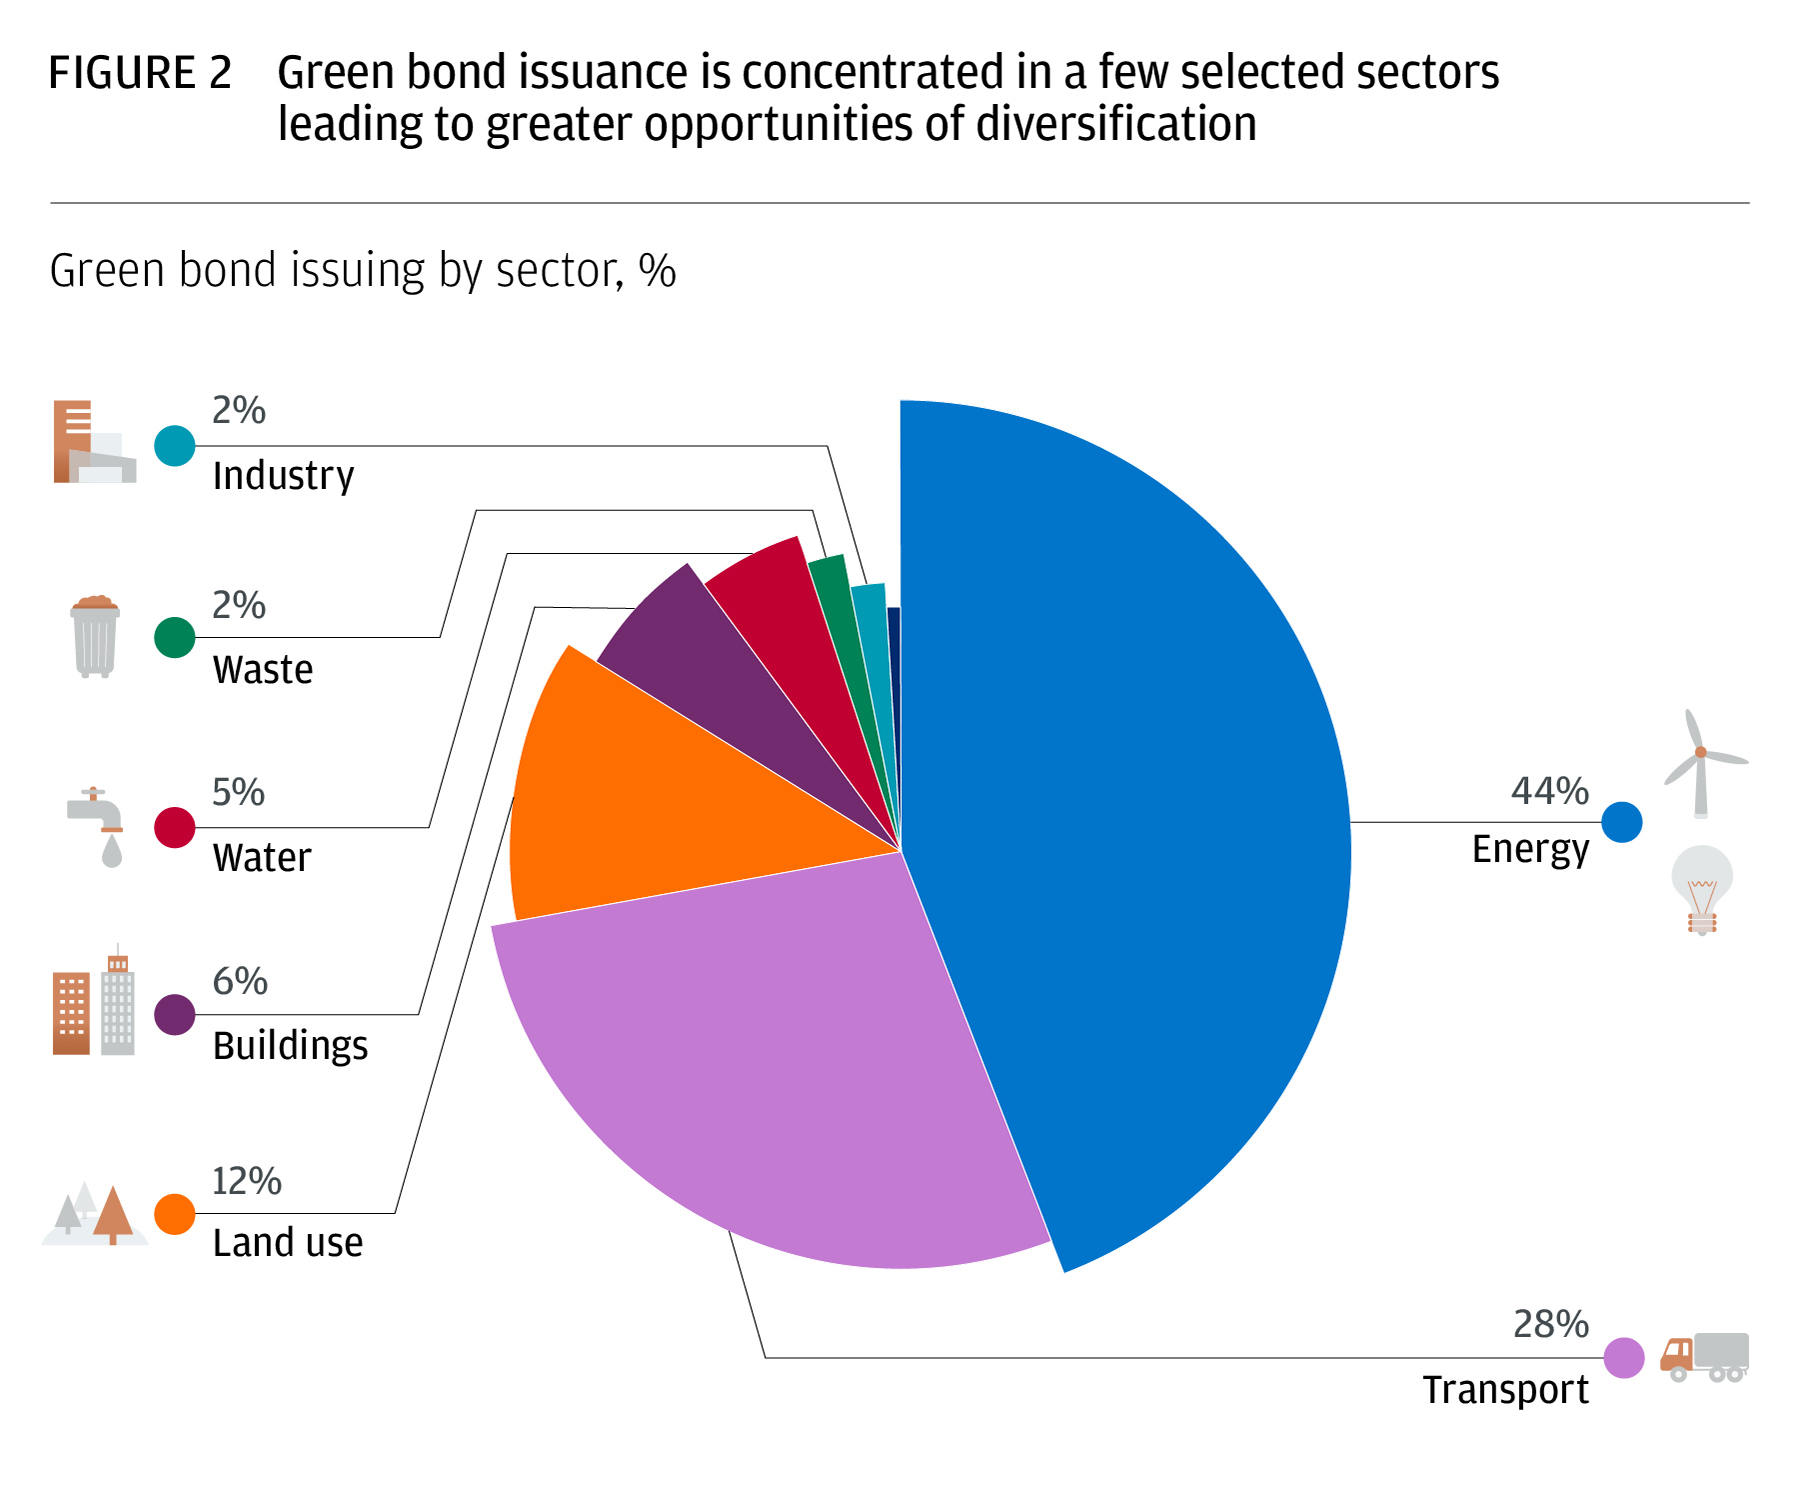 Figure 2 depicts the breakdown of green bond issuing in Latin America by sector